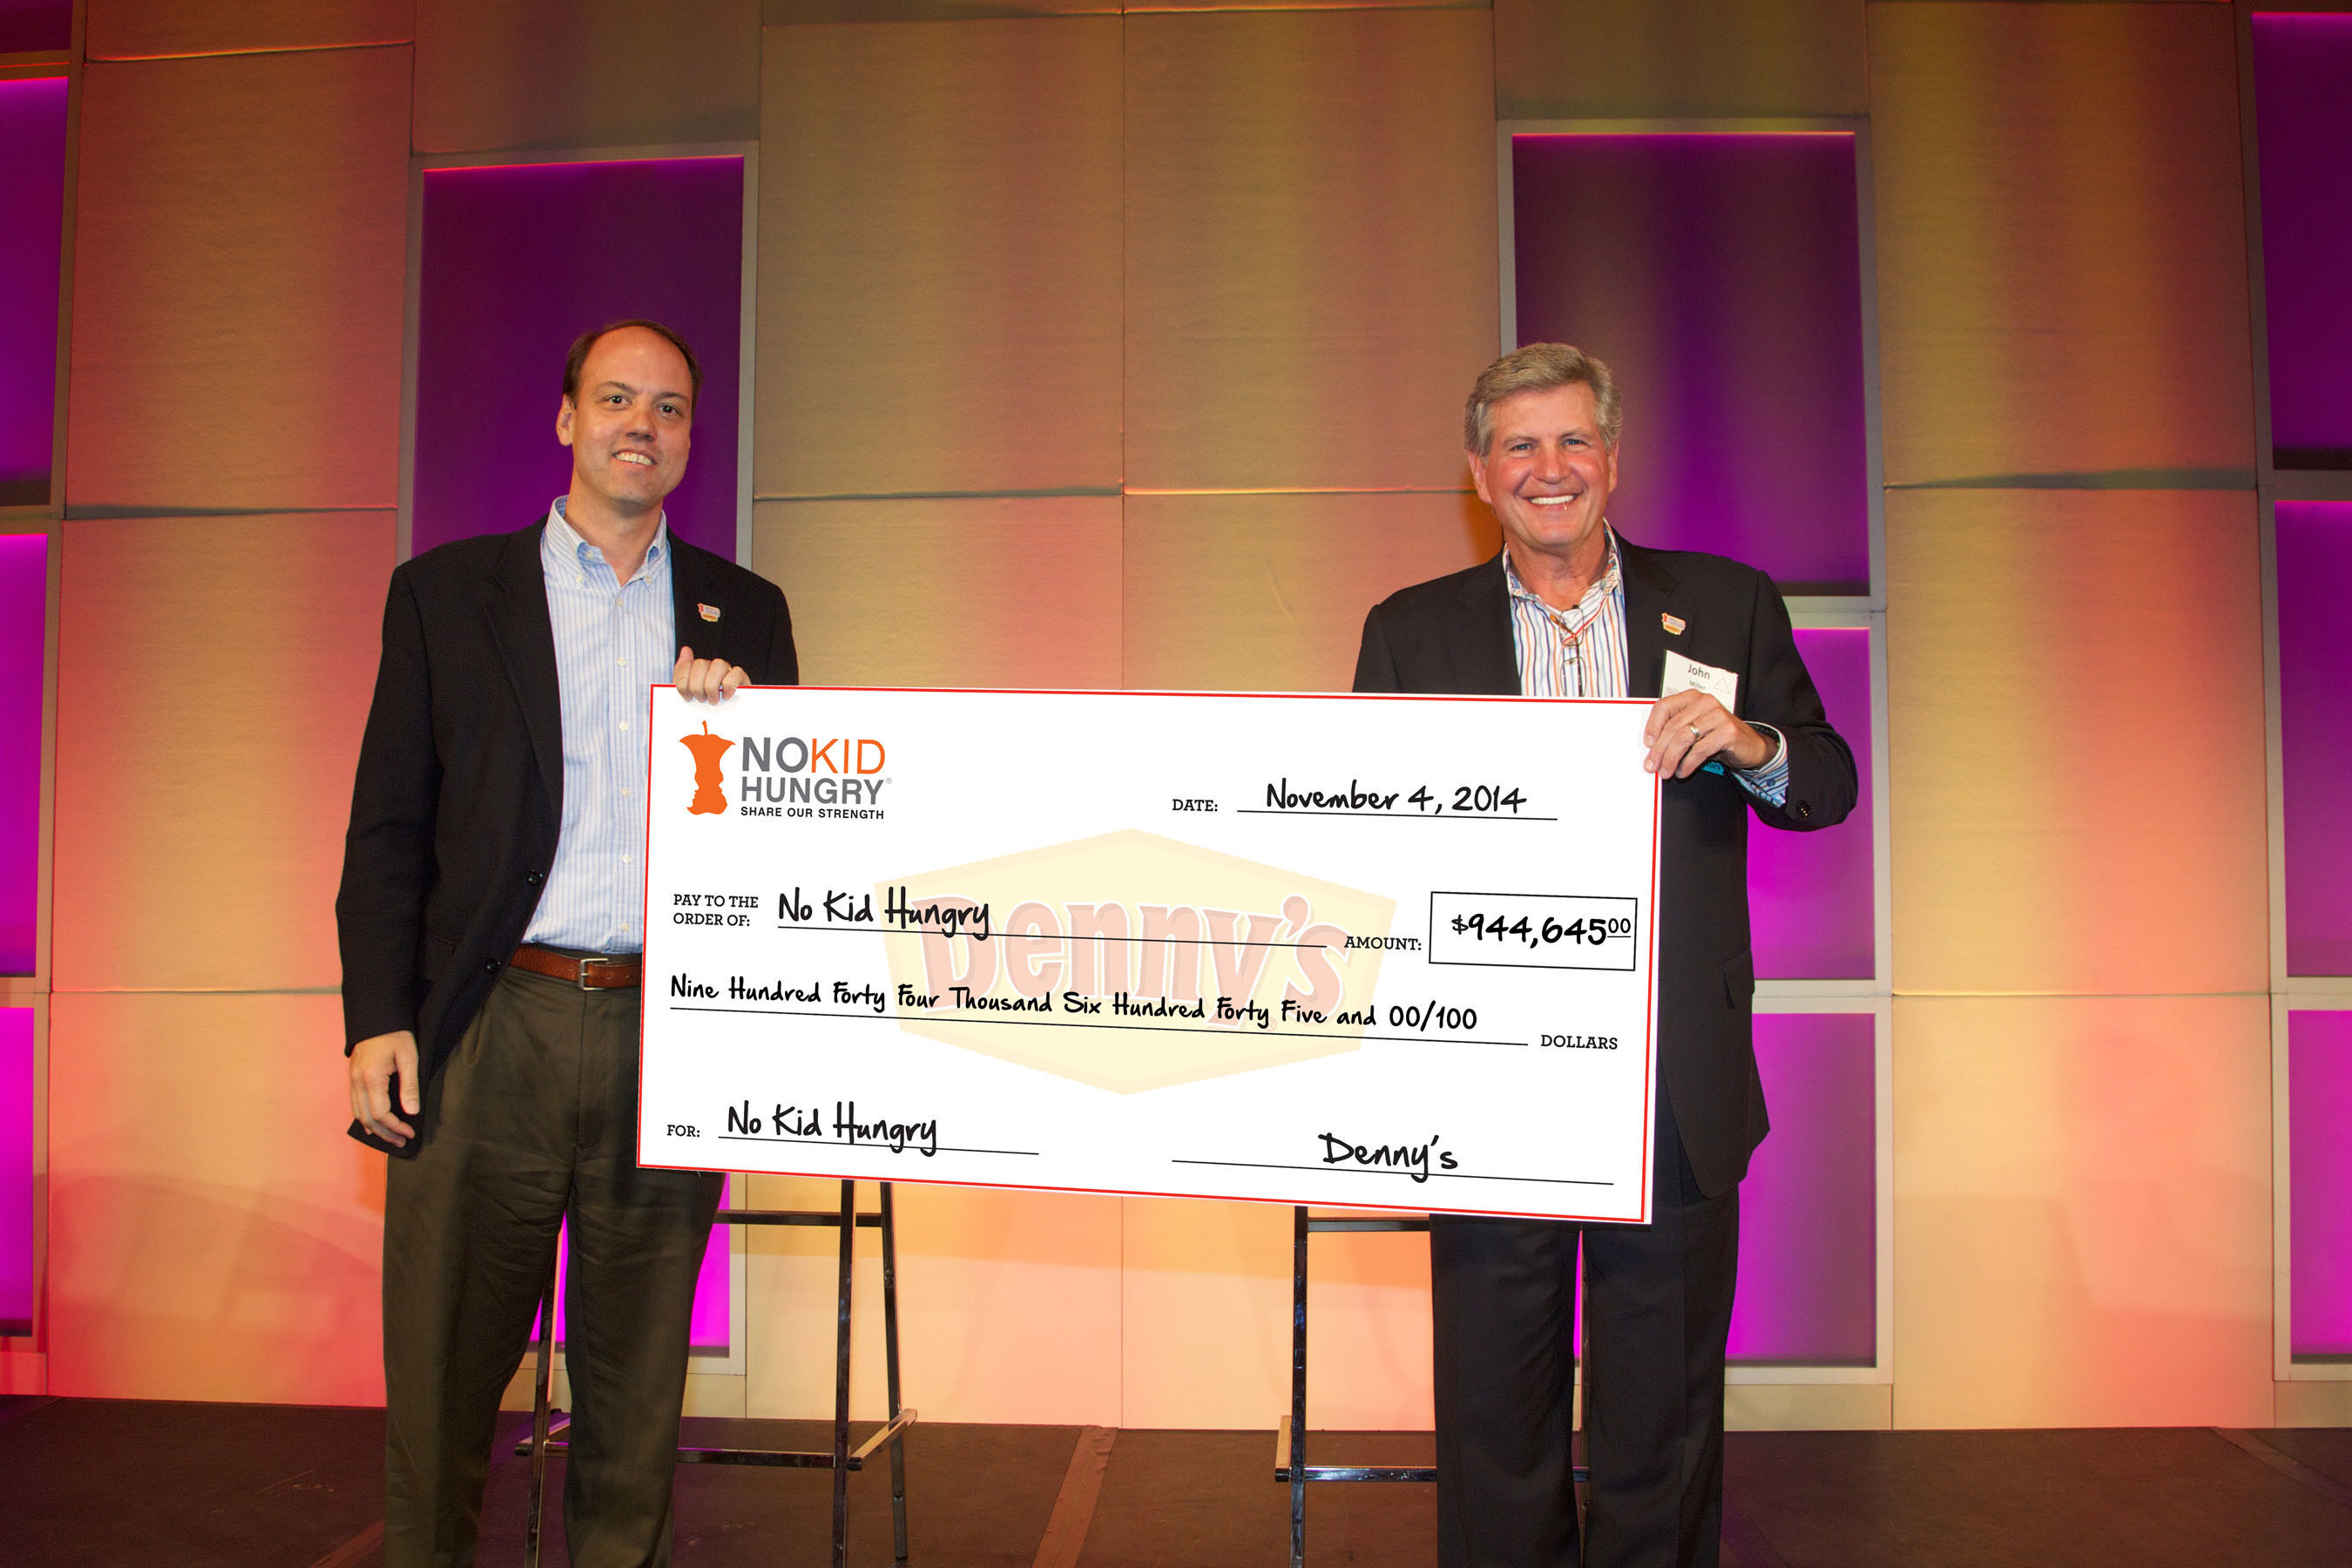 From L-R: Chuck Scofield, Chief Development Officer at Share Our Strength, receives a check from John Miller, Denny's Chief Executive Officer, as part of the diner's fourth annual fundraising efforts for Share Our Strength's No Kid Hungry(R) campaign